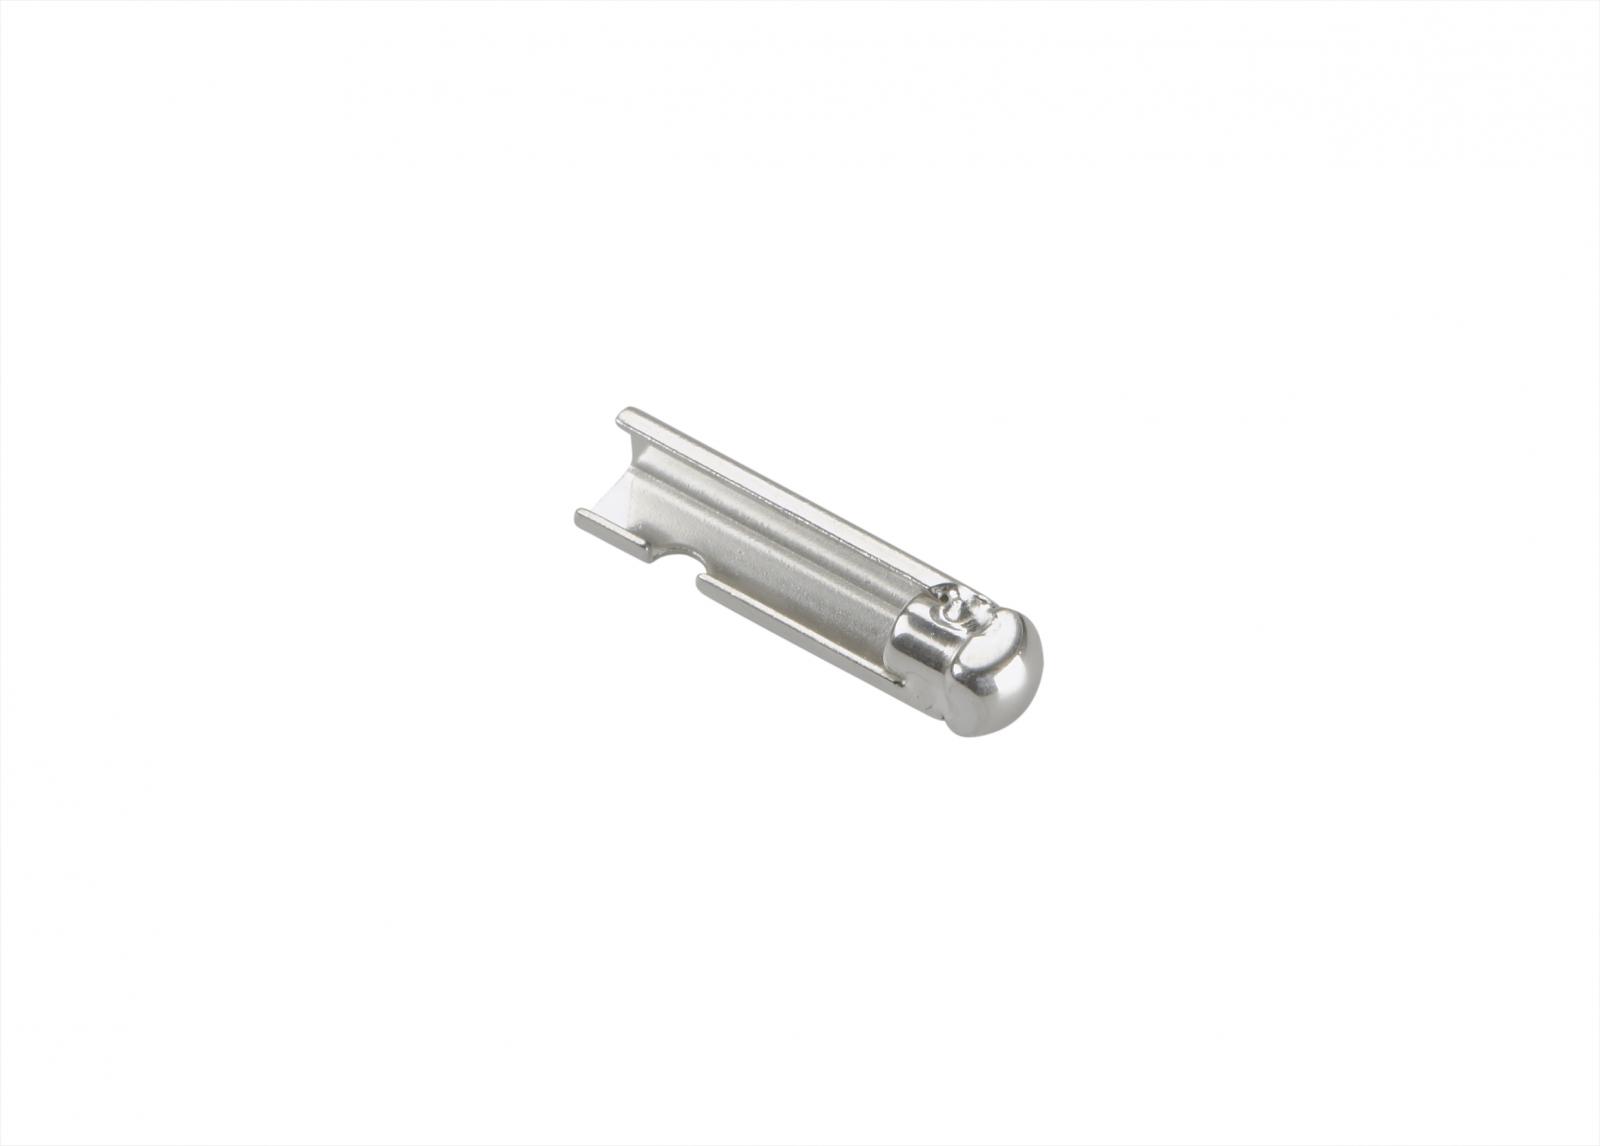 TapeTech® Center Clip Assembly. Part number 484014F